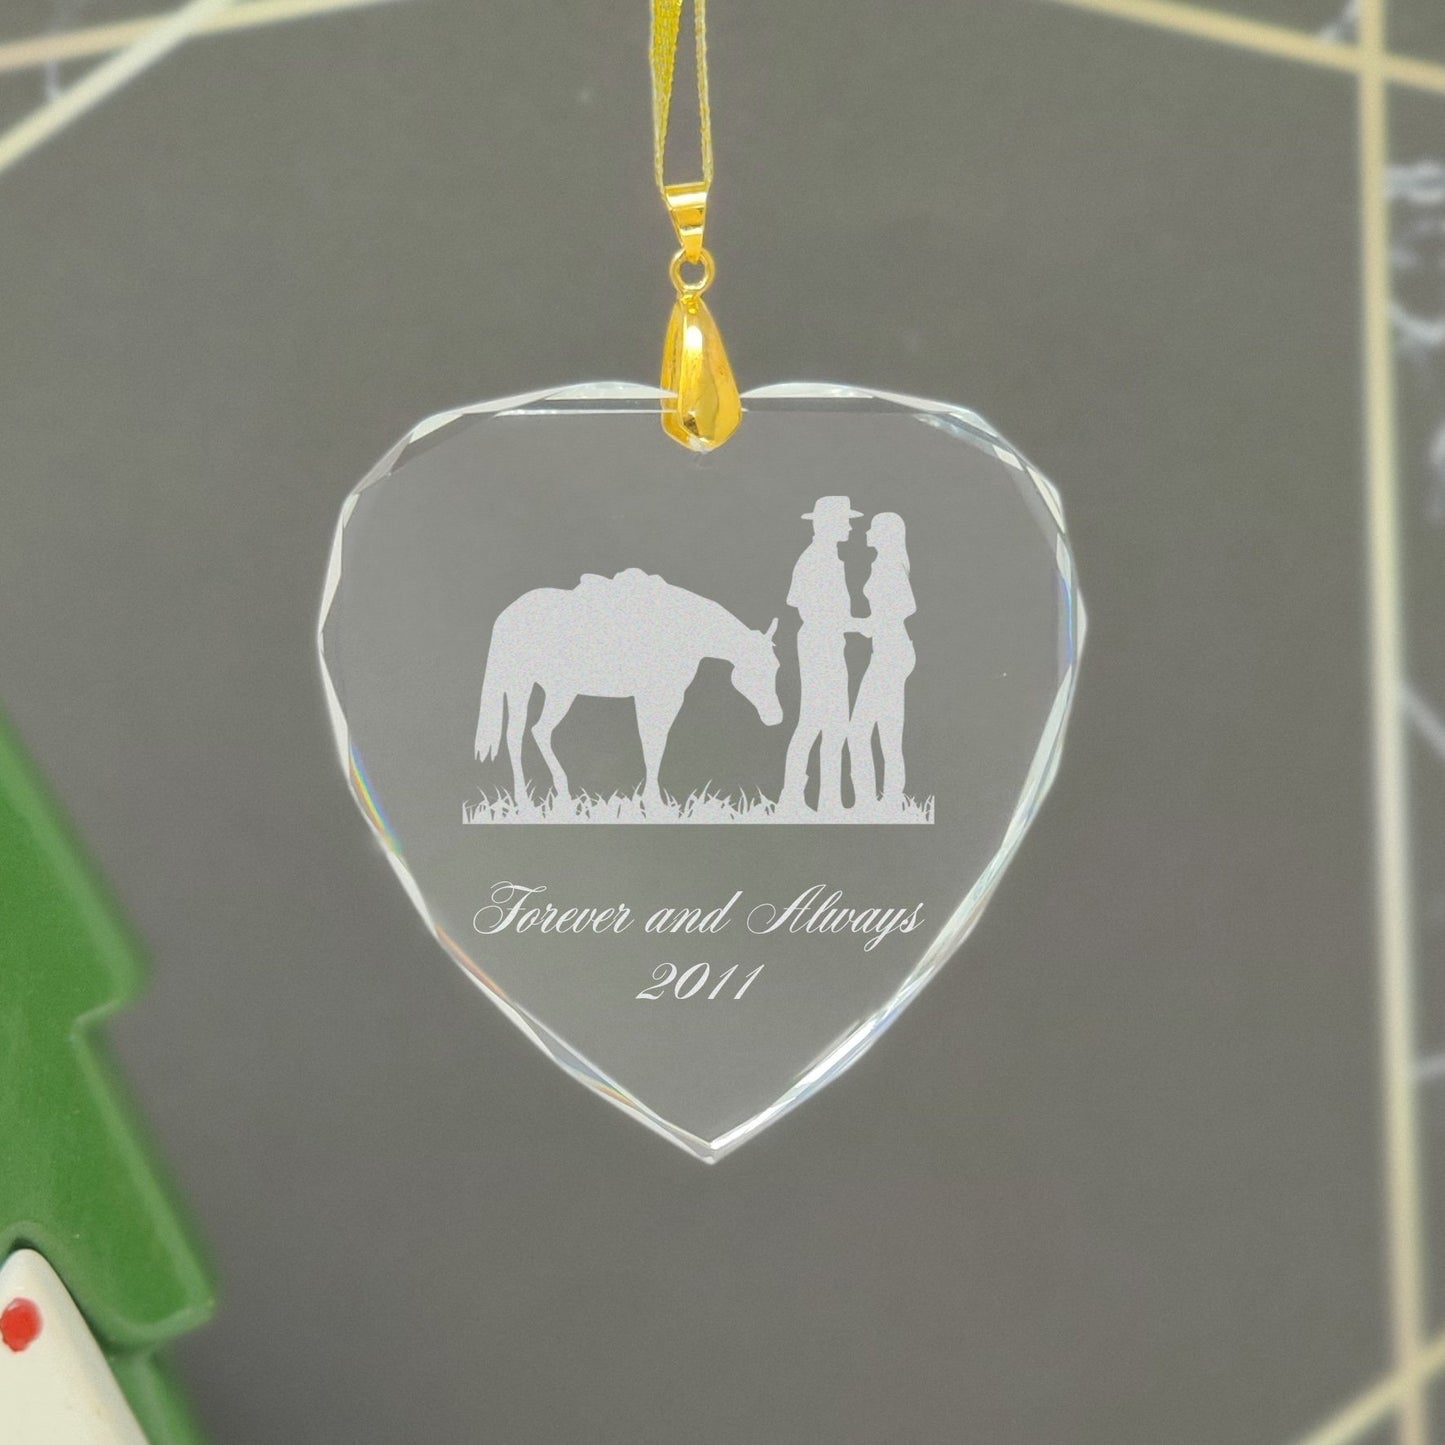 LaserGram Christmas Ornament, Hummingbird, Personalized Engraving Included (Heart Shape)